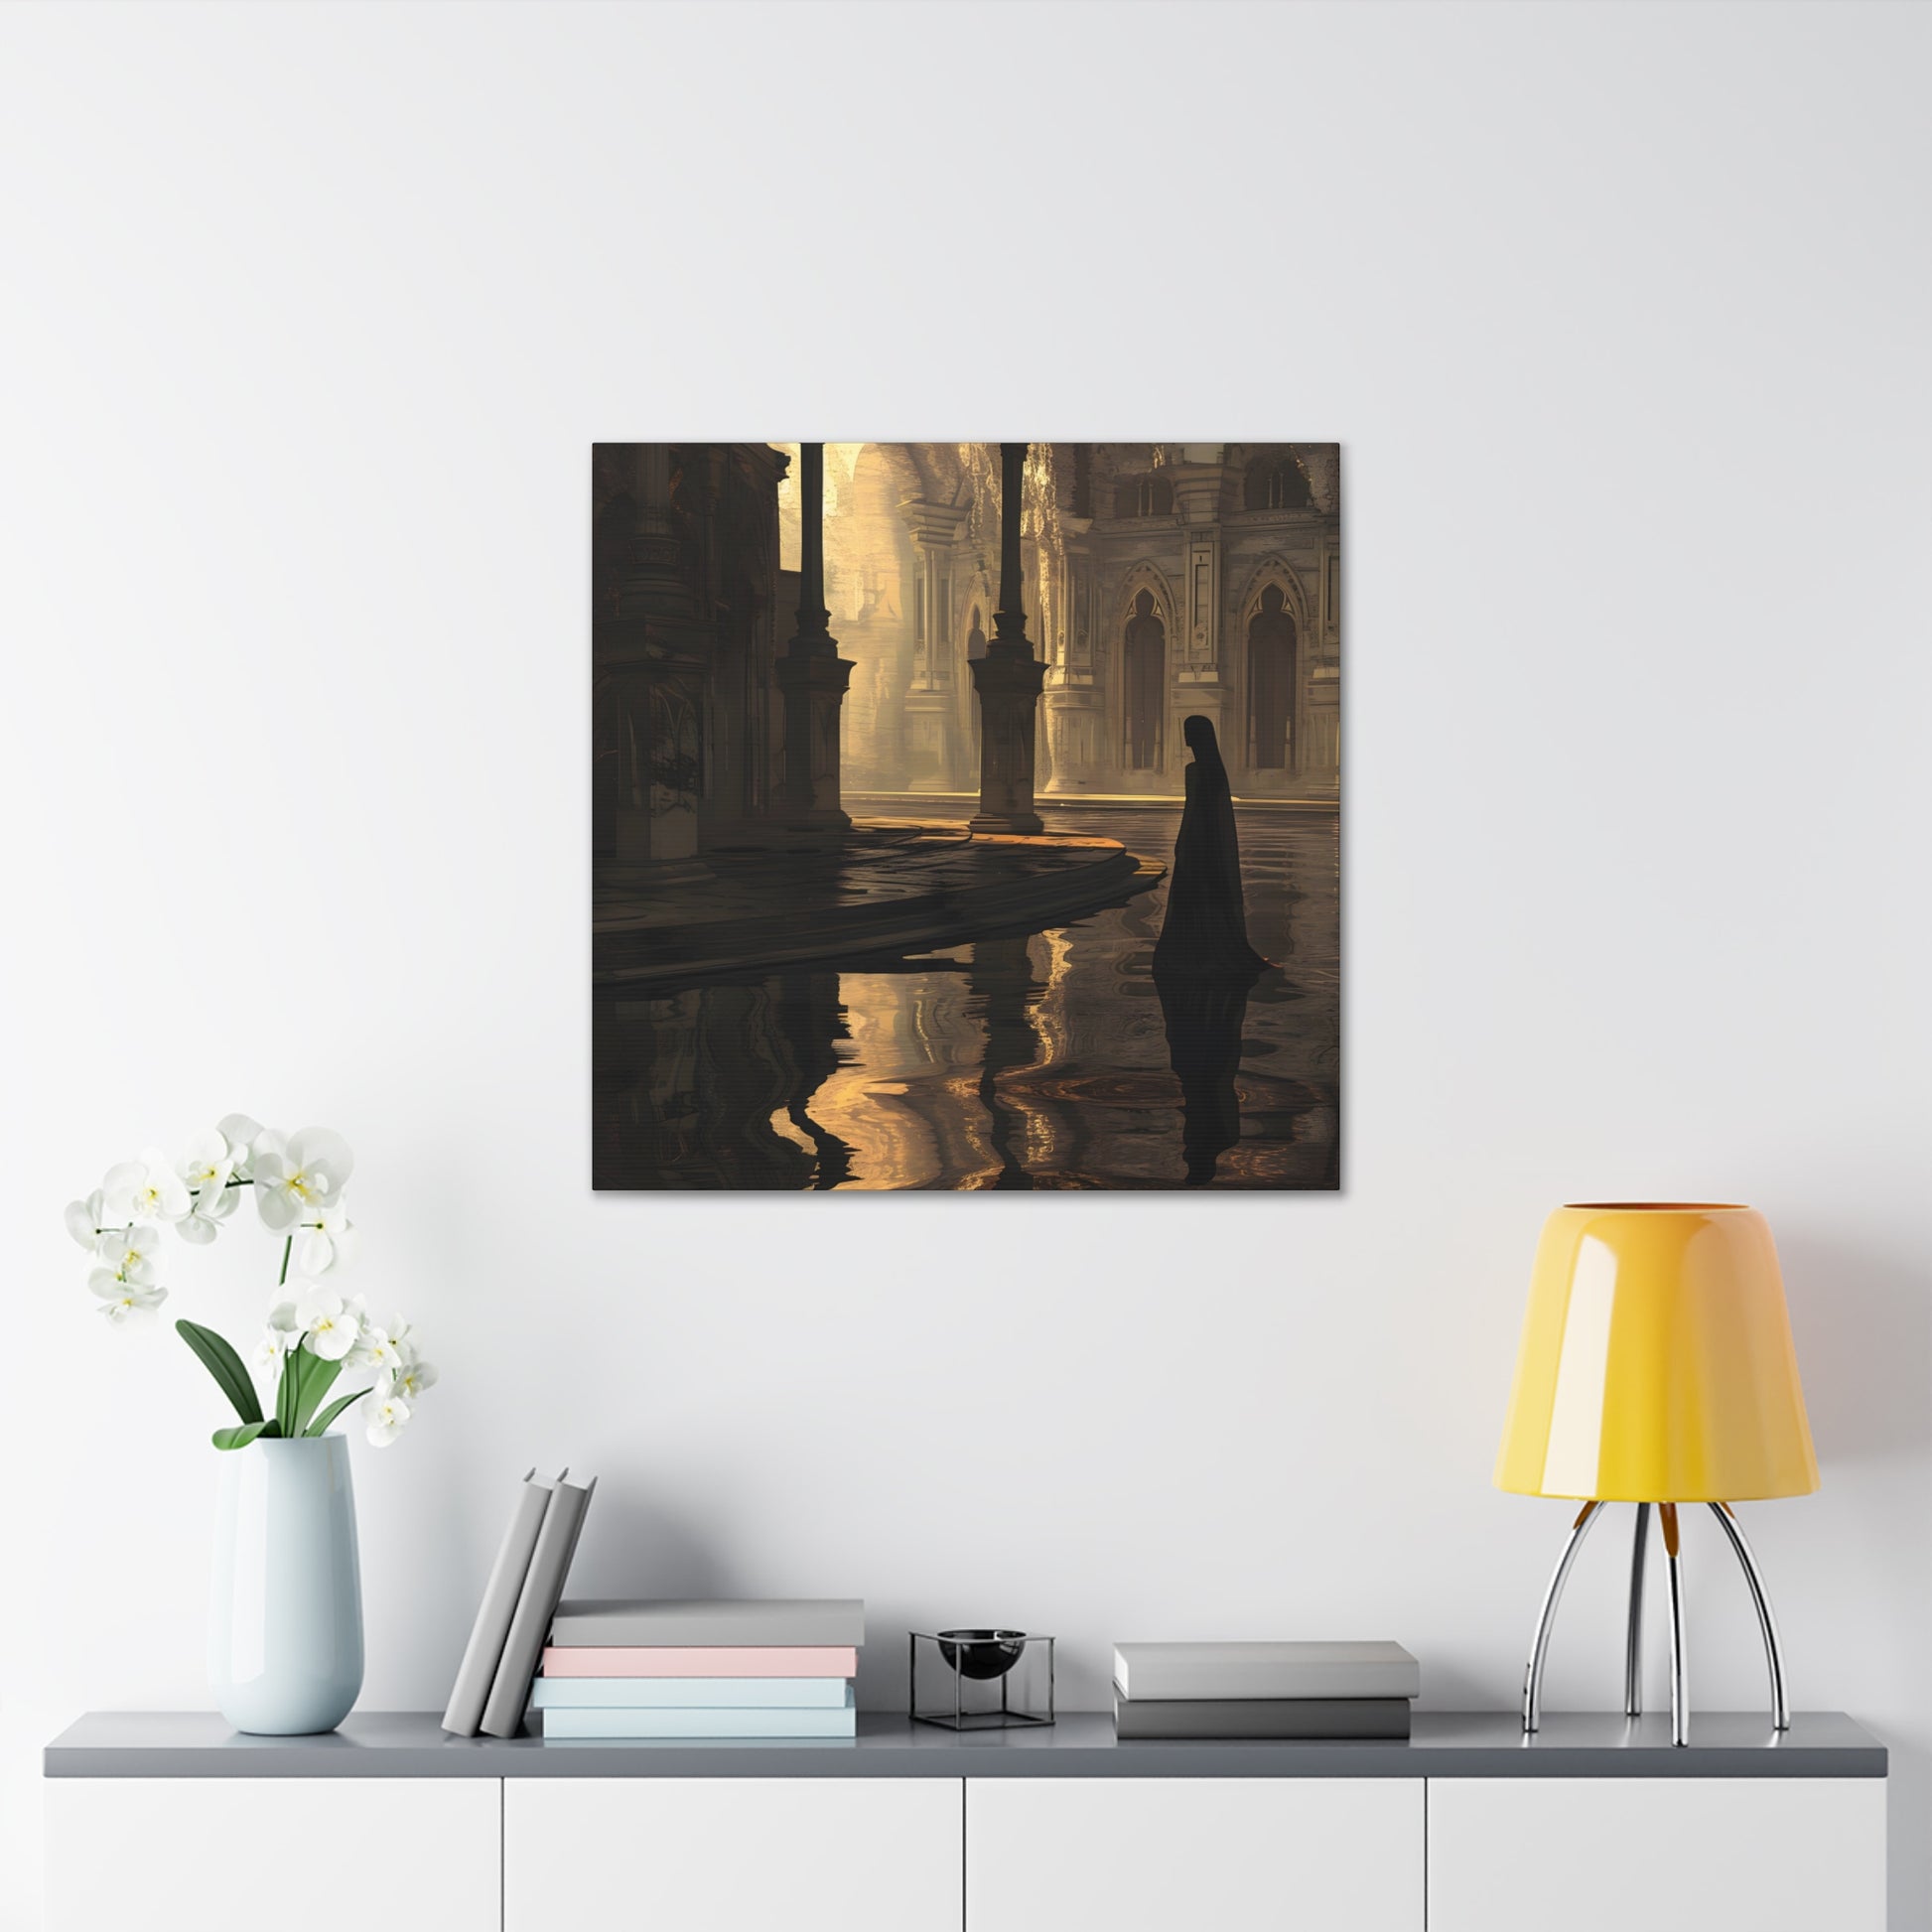 in situ Avery Pennington's artwork of a golden-lit, flooded cathedral with a solitary figure in black, blending Gothic architecture with reflections in water, evoking solitude and introspection